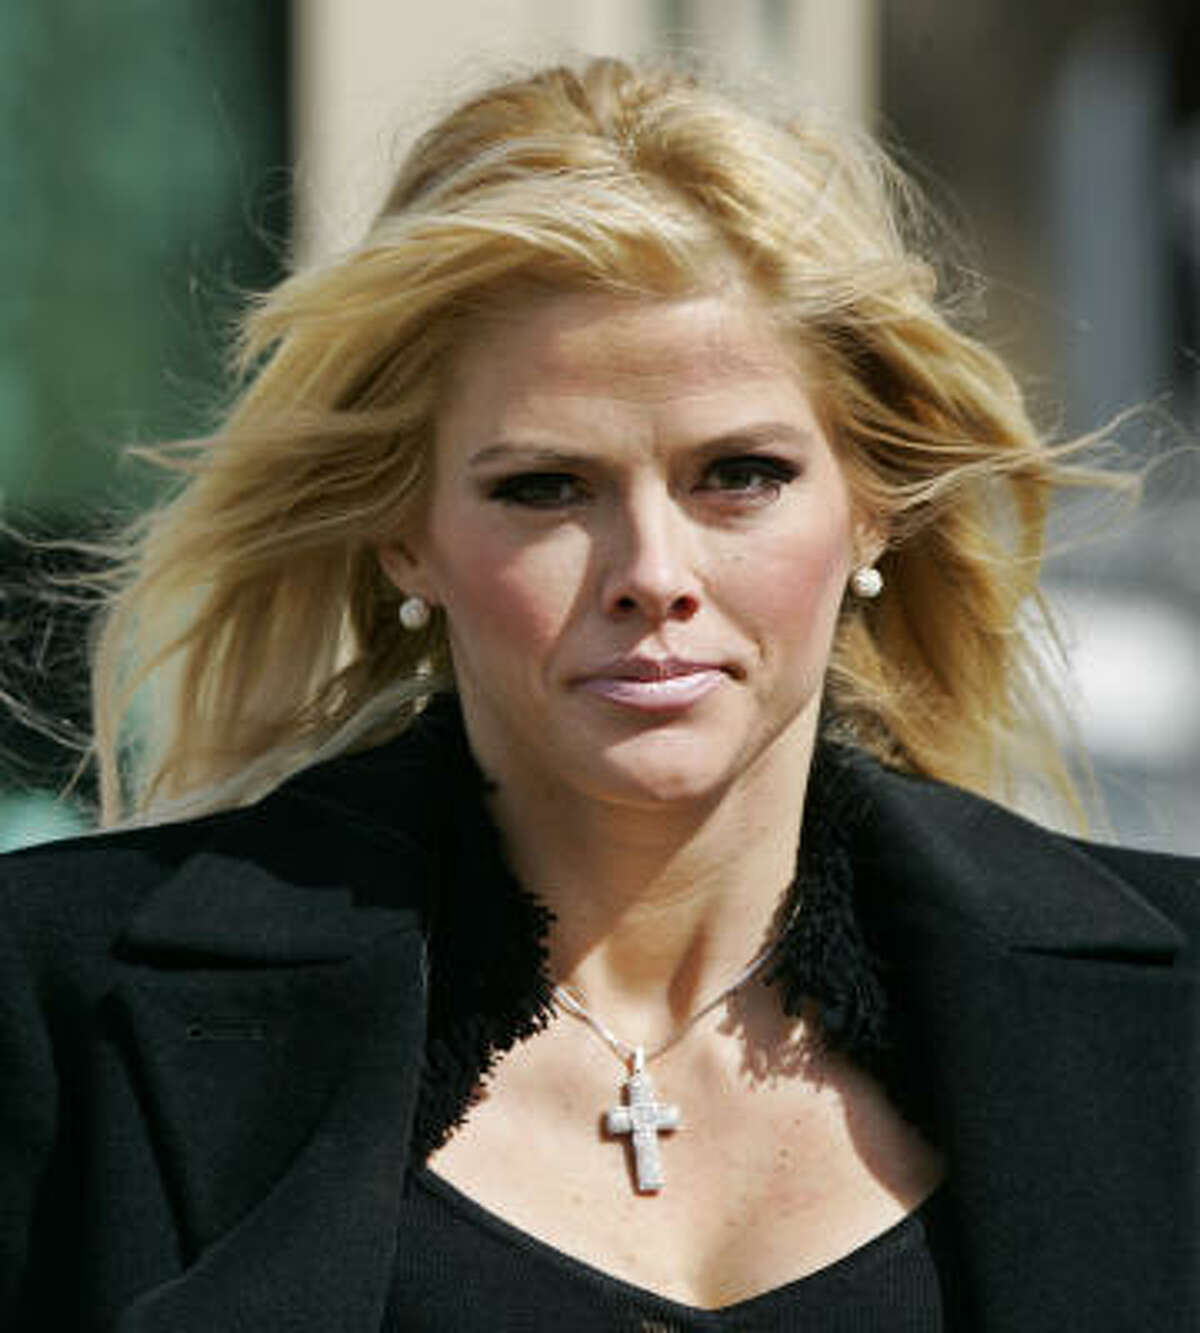 E. Pierce Marshall has been locked in a legal battle with his father's widow, Anna Nicole Smith, seen here leaving the U.S. Supreme Court in February, over her entitlement to the Marshall estate.